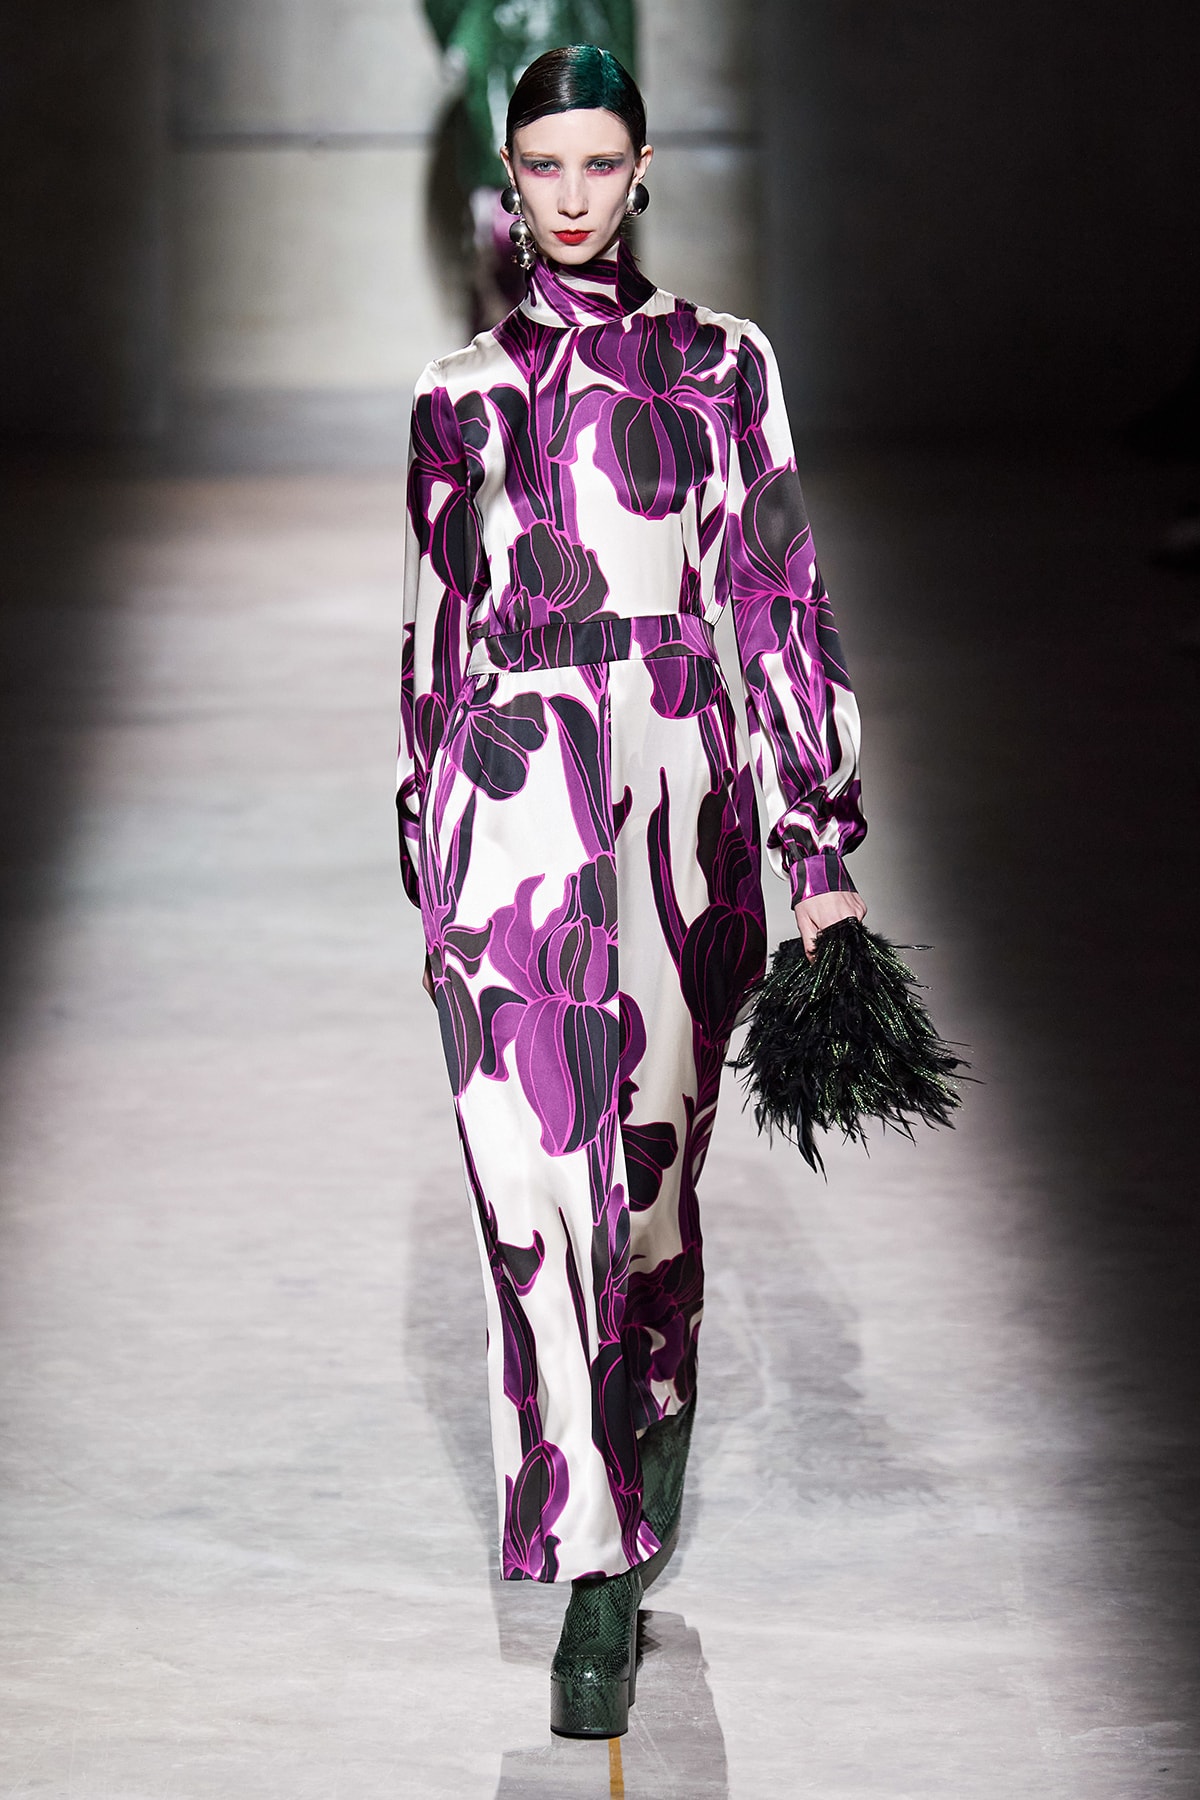 Dries Van Noten Fall/Winter 2020 Collection Runway Show Floral Dress Orchid Purple